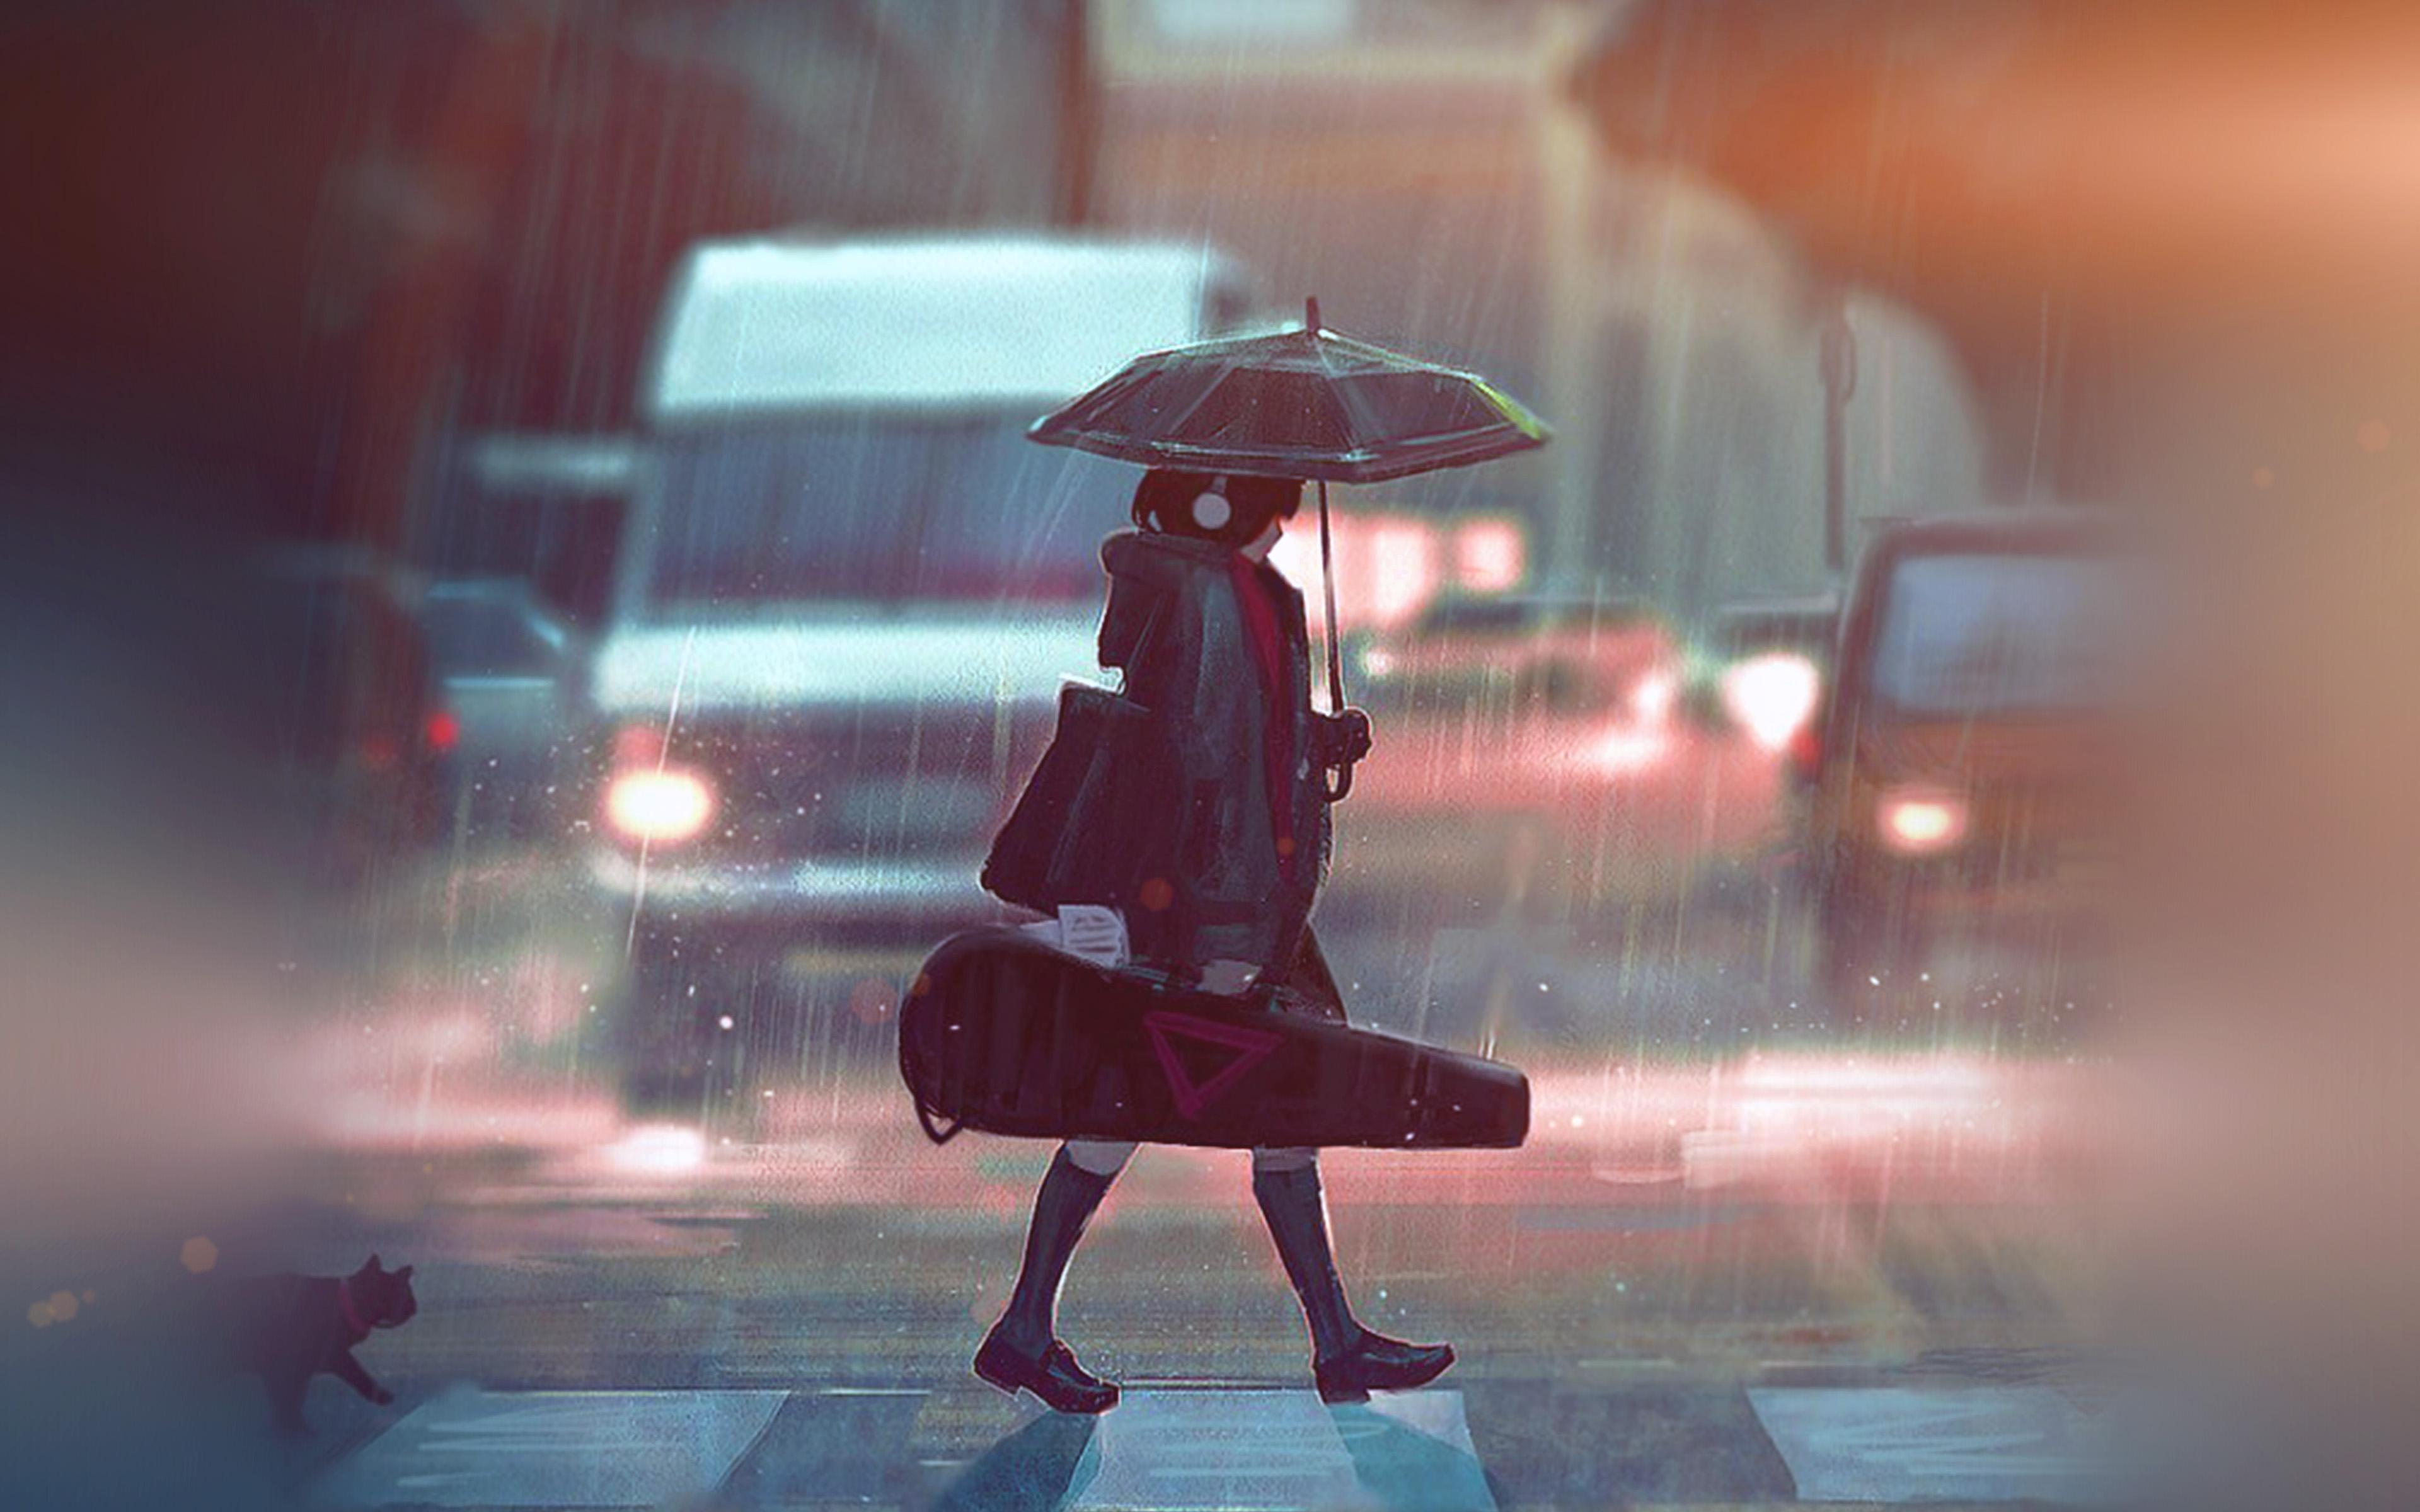 Best Of Wallpaper Rainy Day Image image